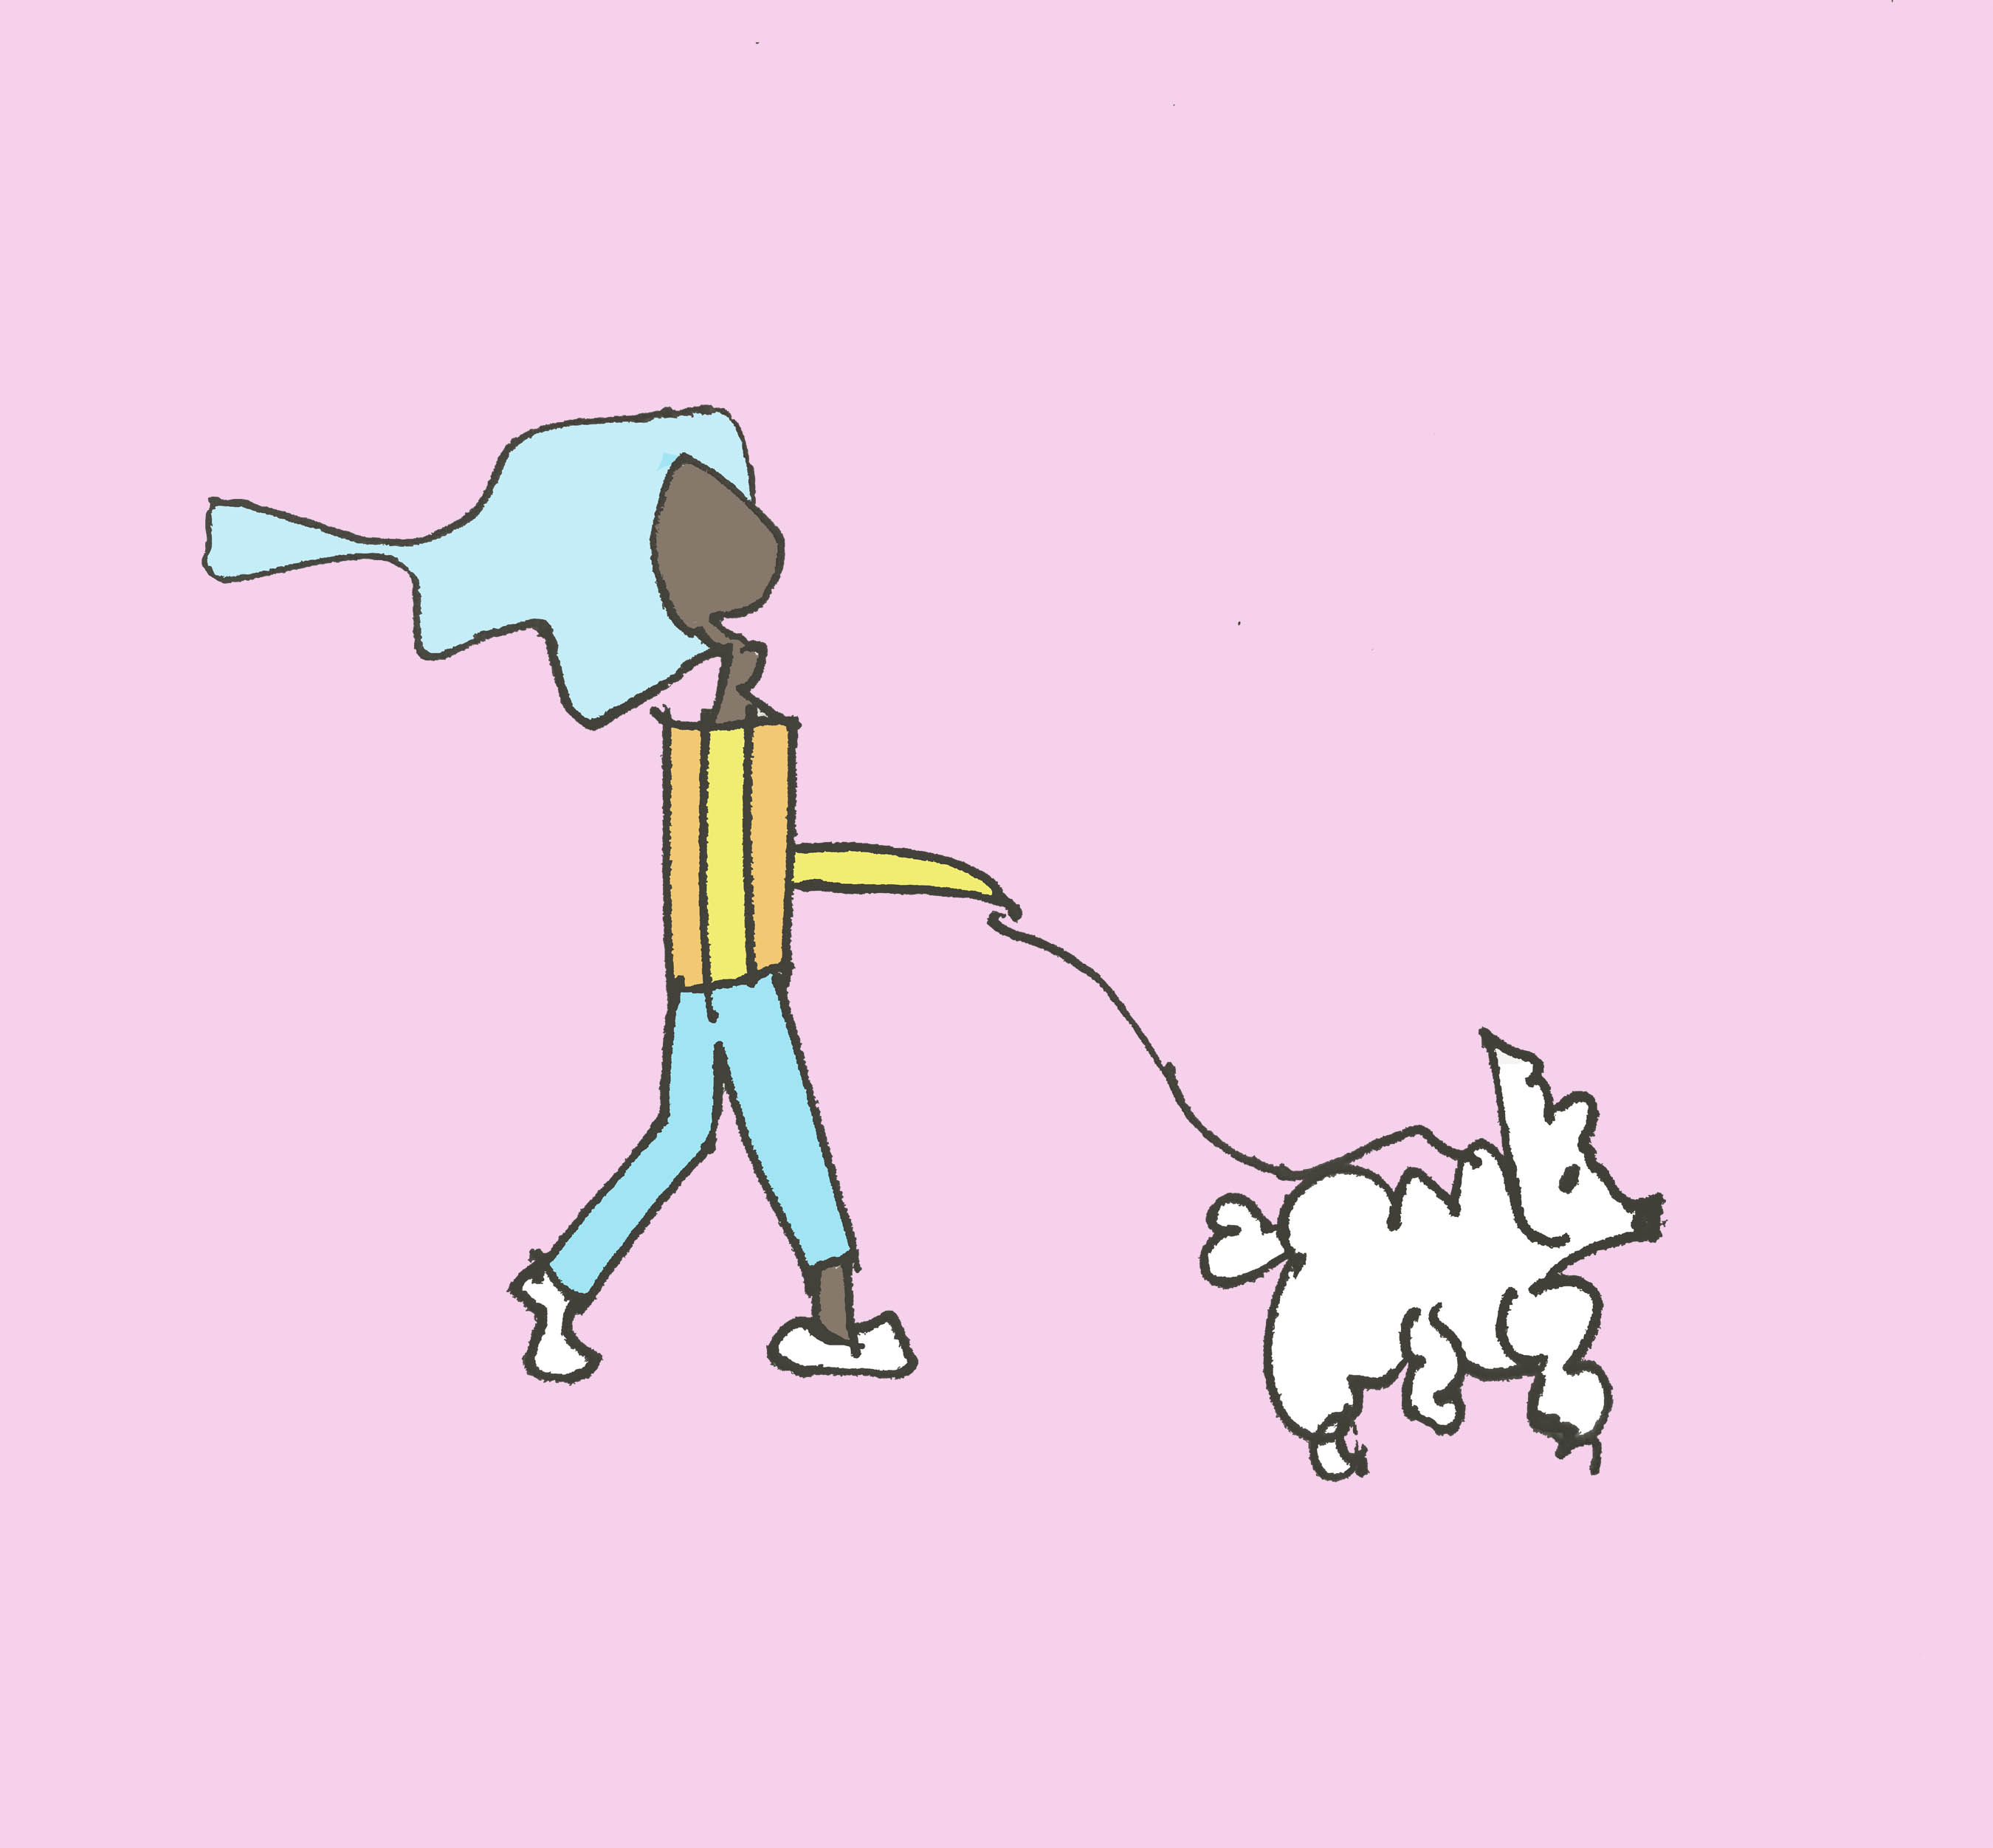 art every day number 473 / illustration  / the fluffy dog